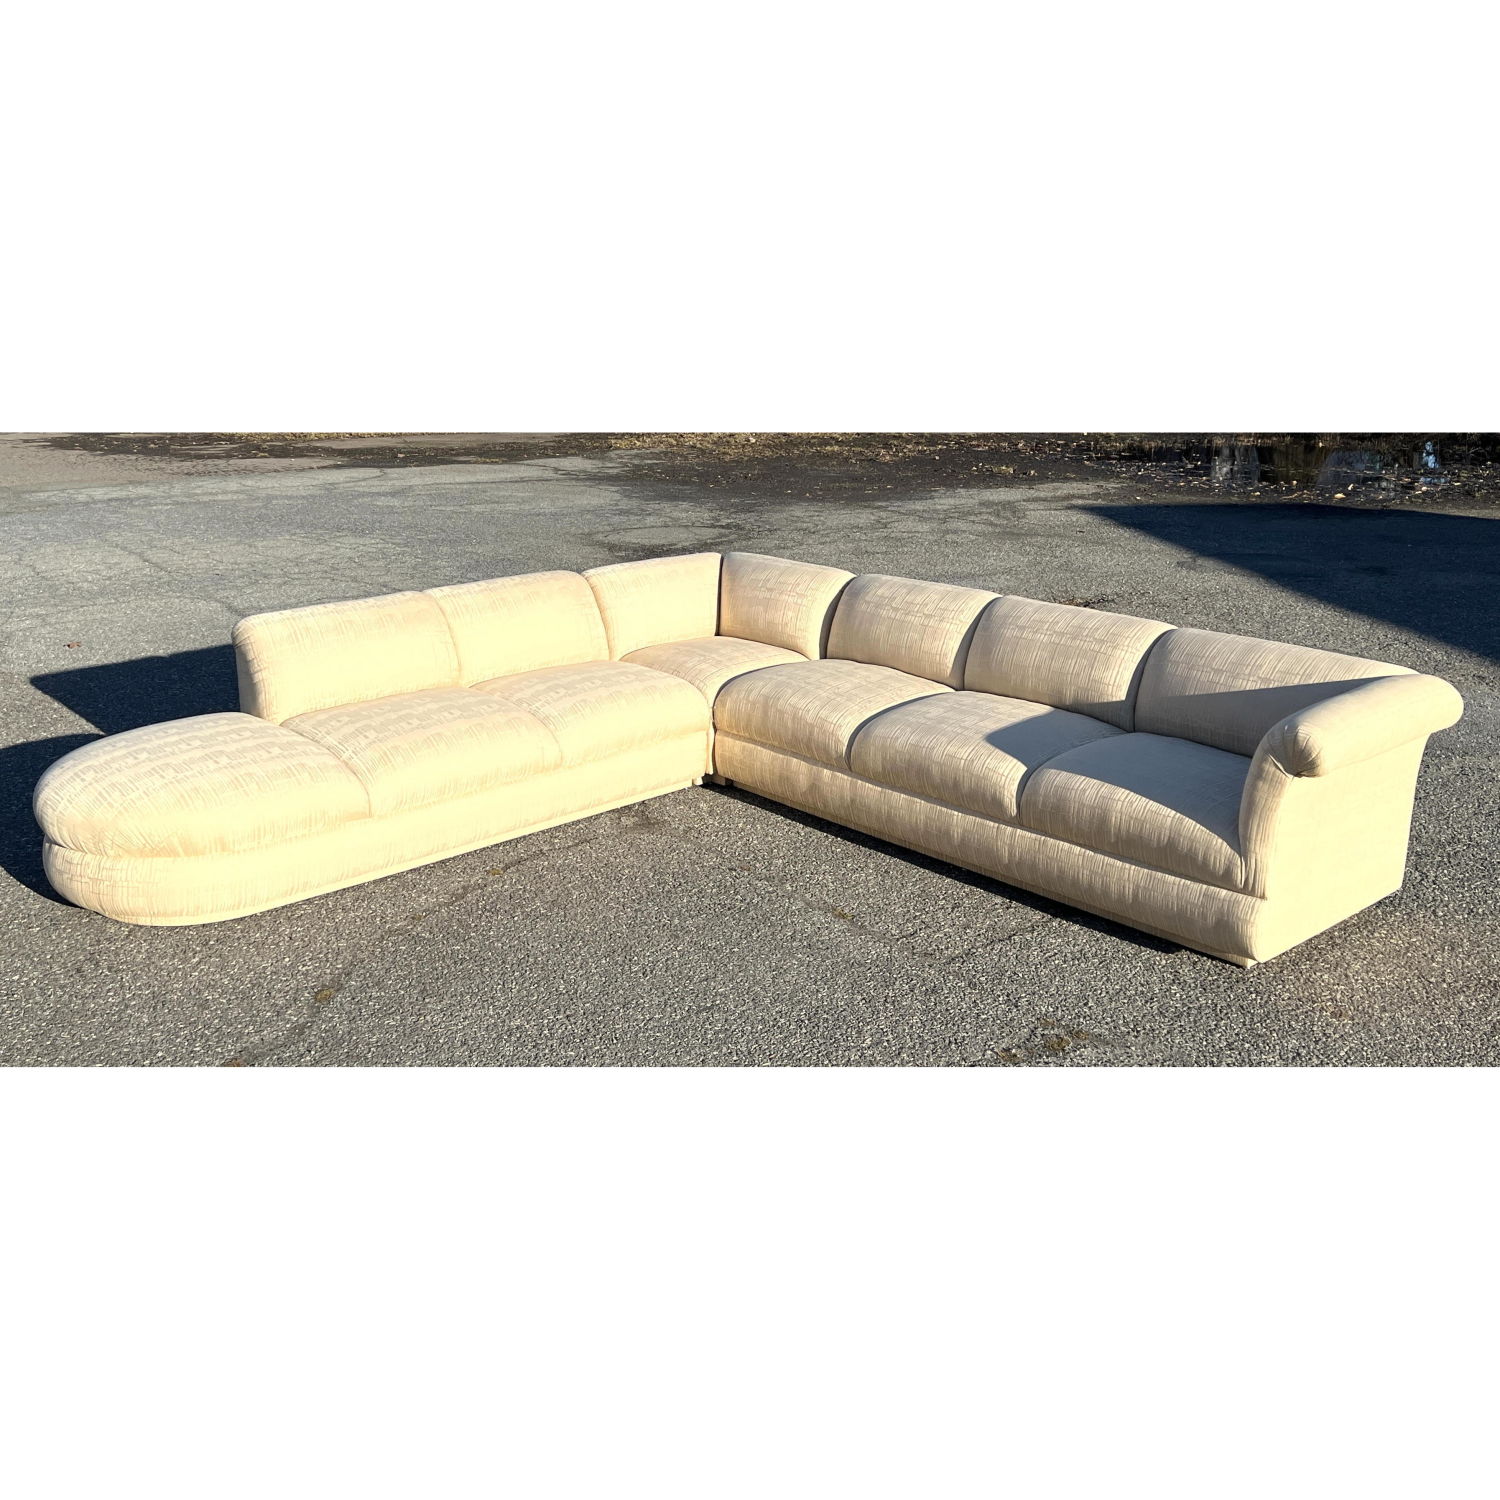 3pc Modernist Sectional Sofa Pit 2ff465